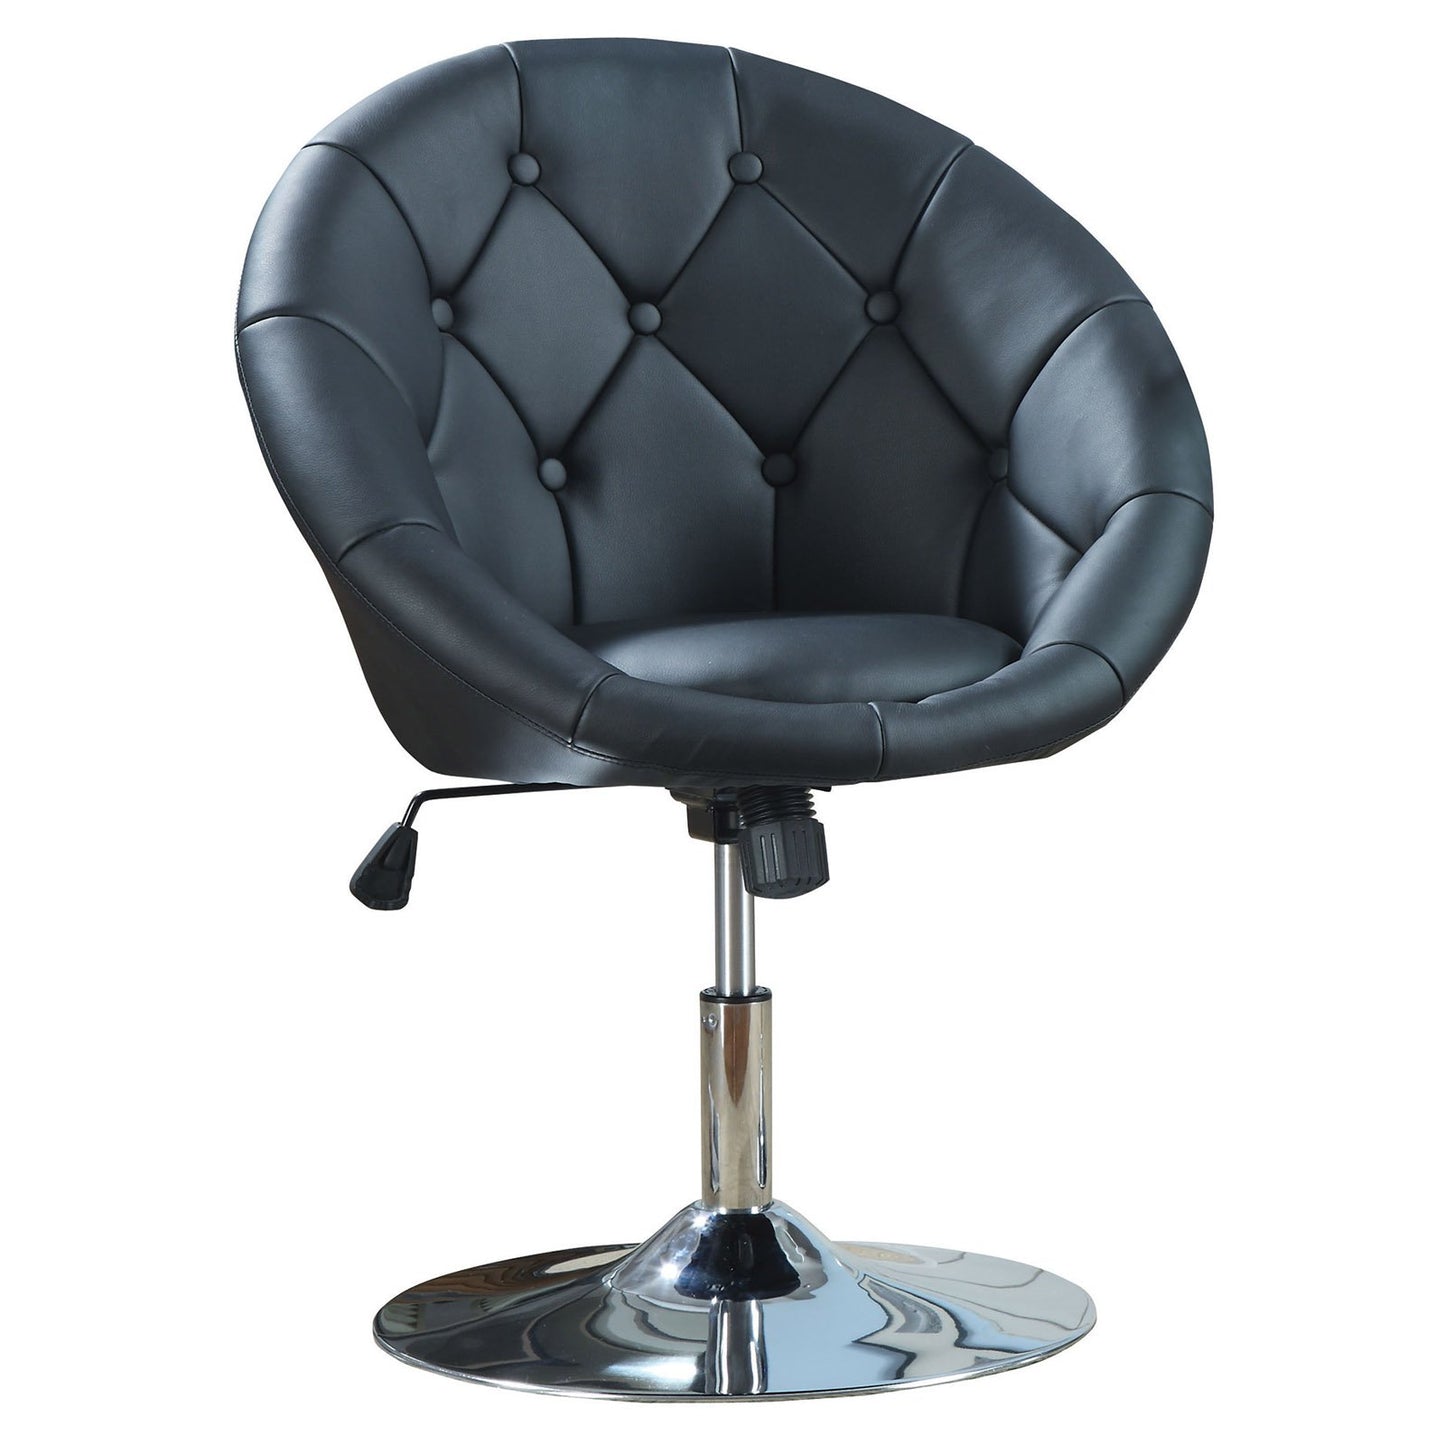 Round Tufted Swivel Chair Black and Chrome